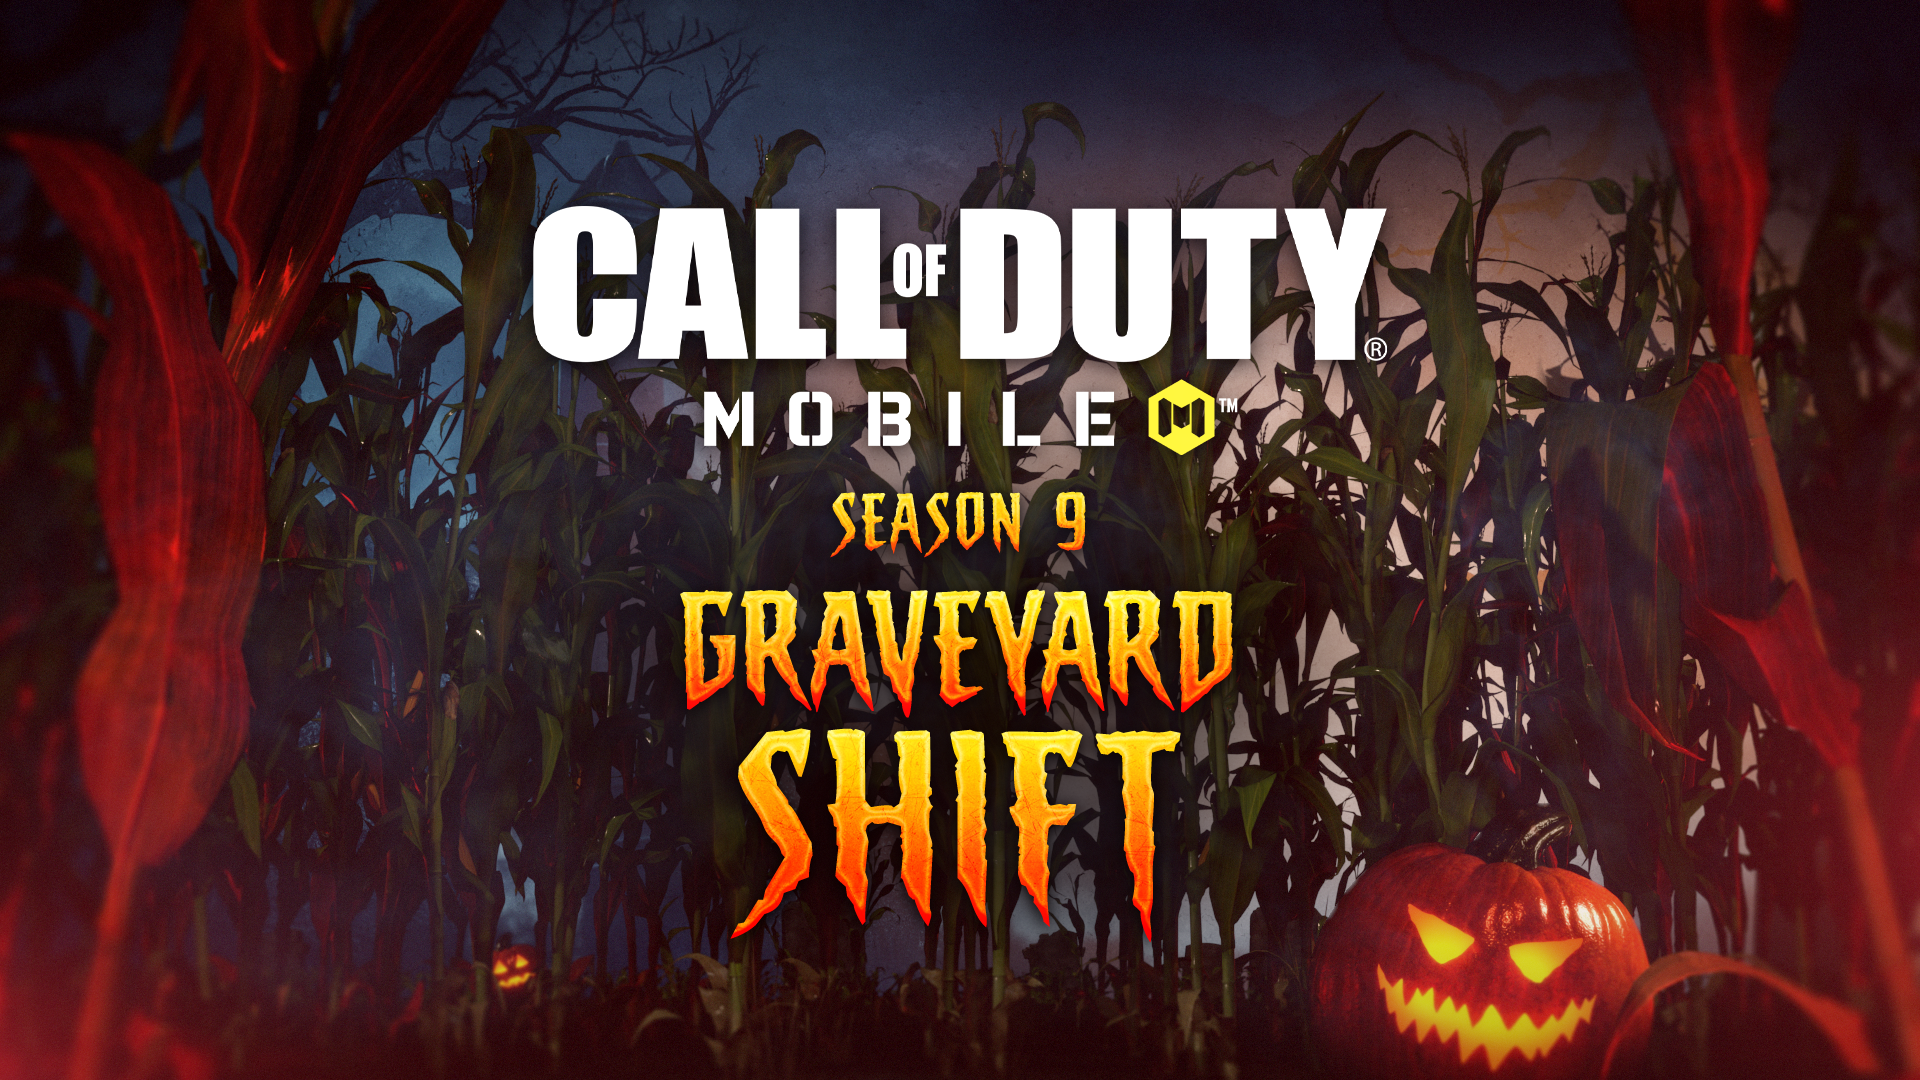 Zombies Rise Again In Call of Duty: Mobile On 5 October in Season 9: Graveyard Shift